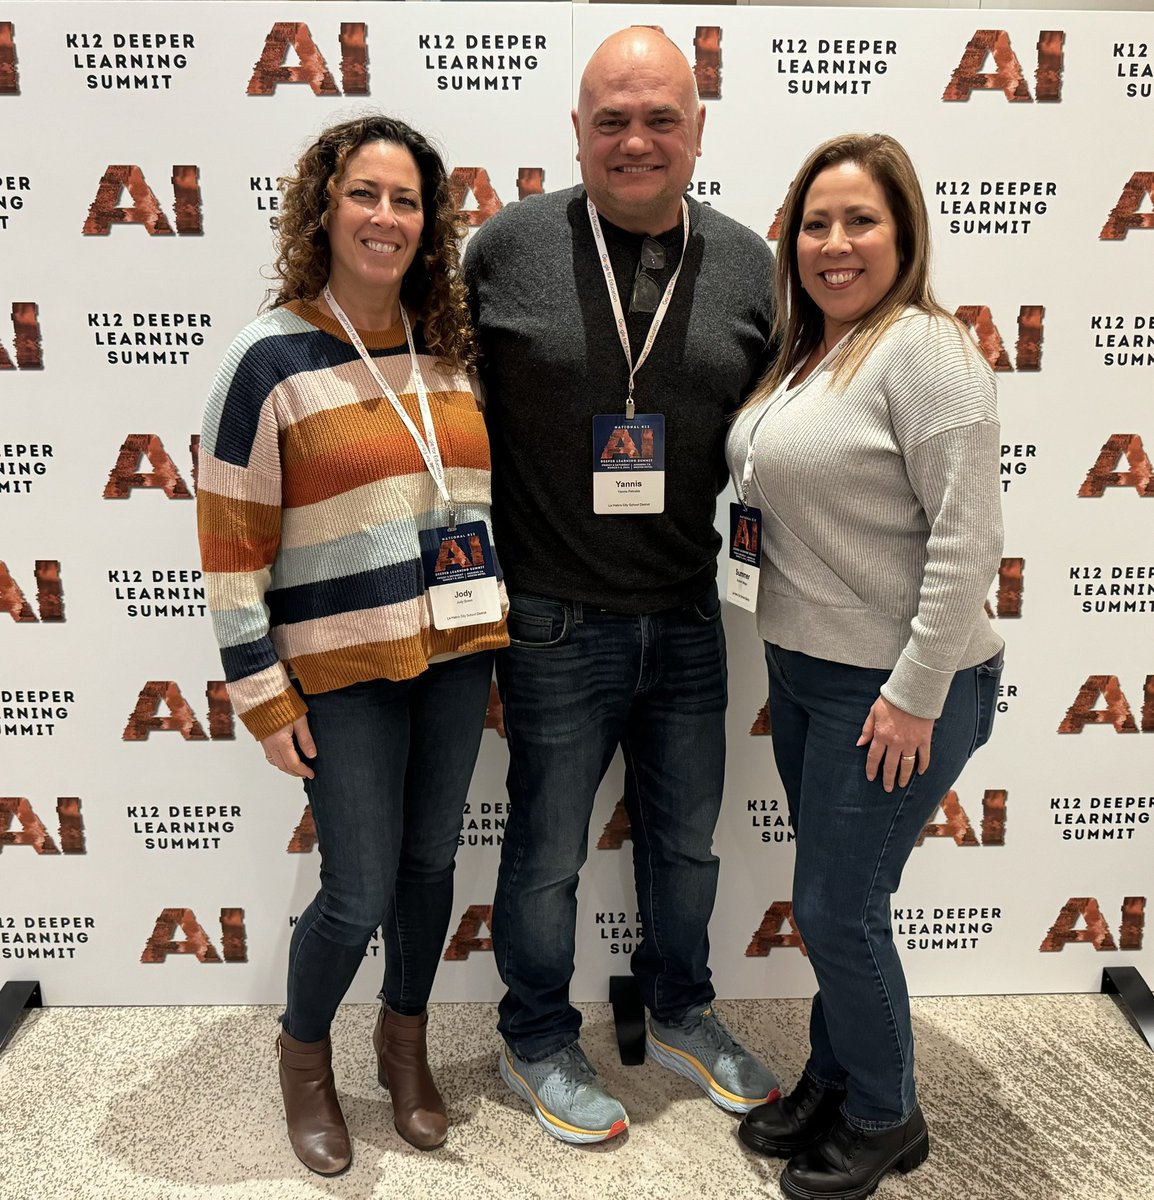 We had a great 2 days of learning at the K-12 AI Deeper Learning Summit! Great conversations and lots of learning took place and we can’t wait to bring it back to #lhcsd! @WMS_Villegas @YannisPetrakis @WMSPatriots